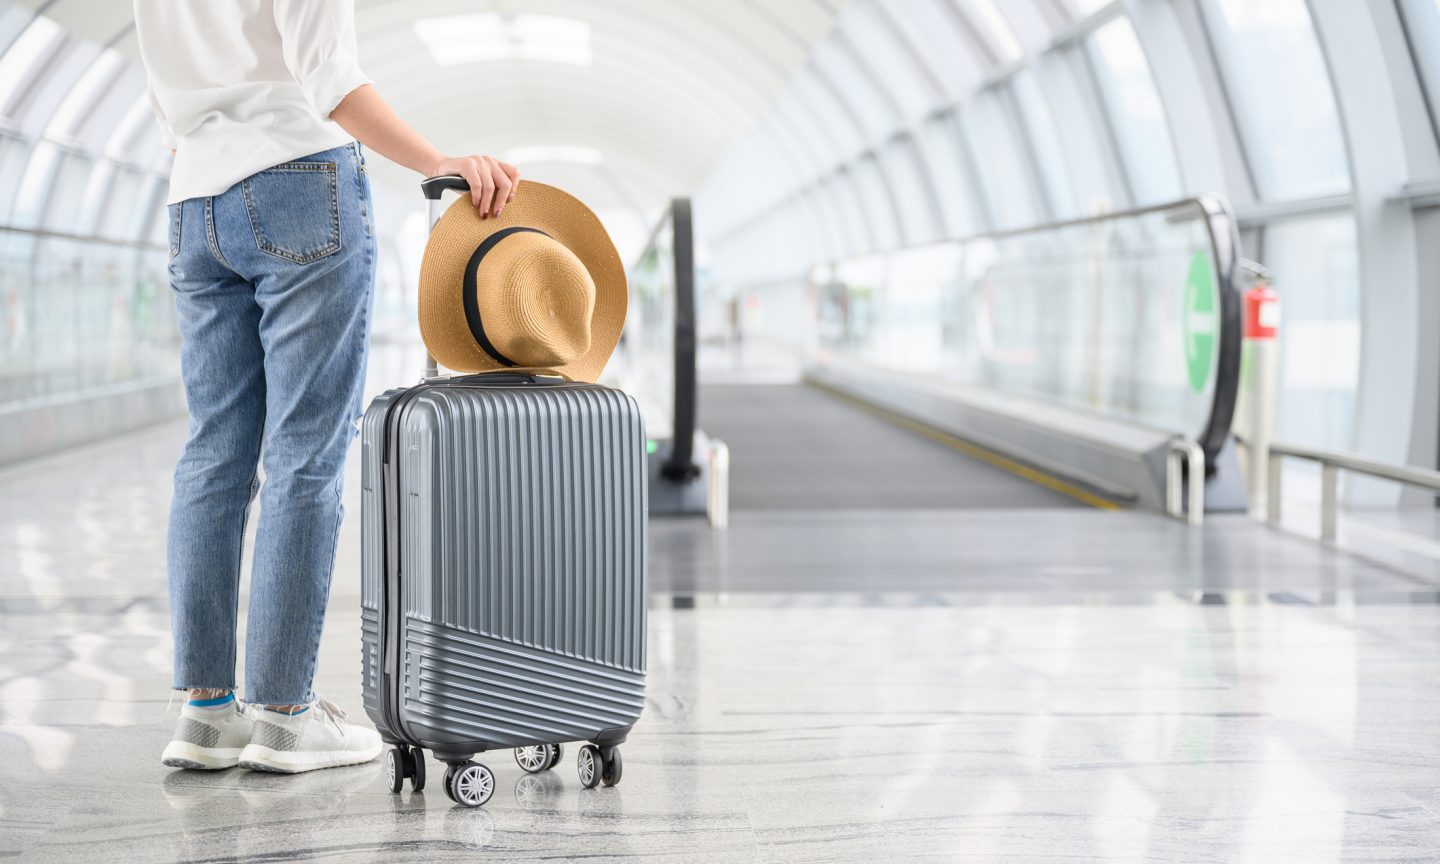 TSA Carry-On Restrictions You Need to Know - NerdWallet